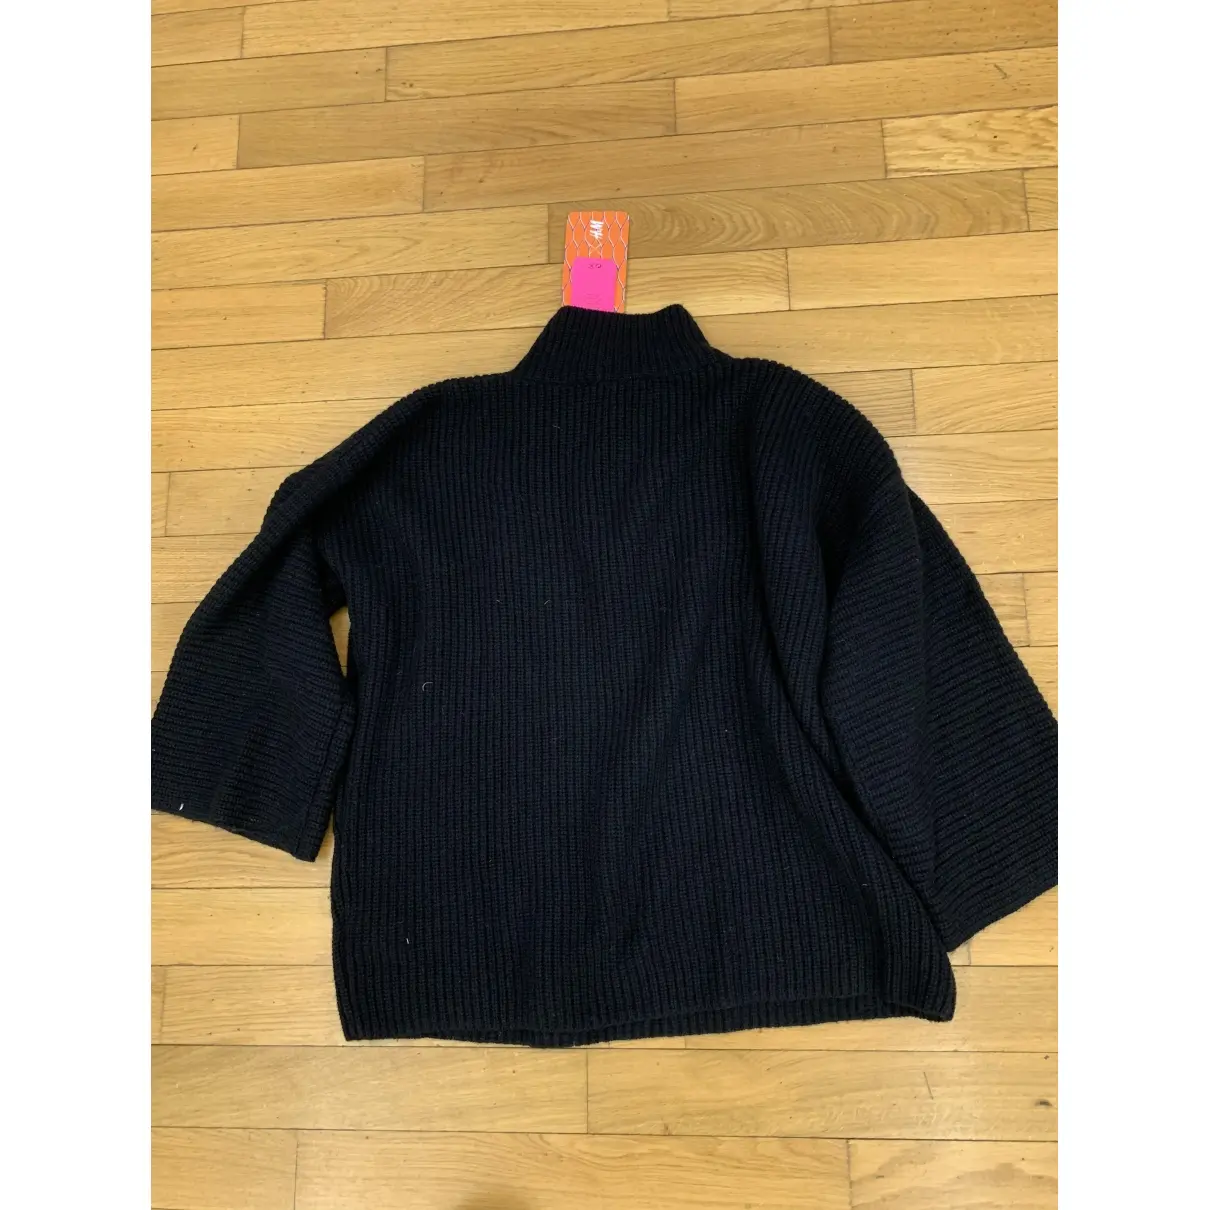 Kenzo x H&M Wool jumper for sale